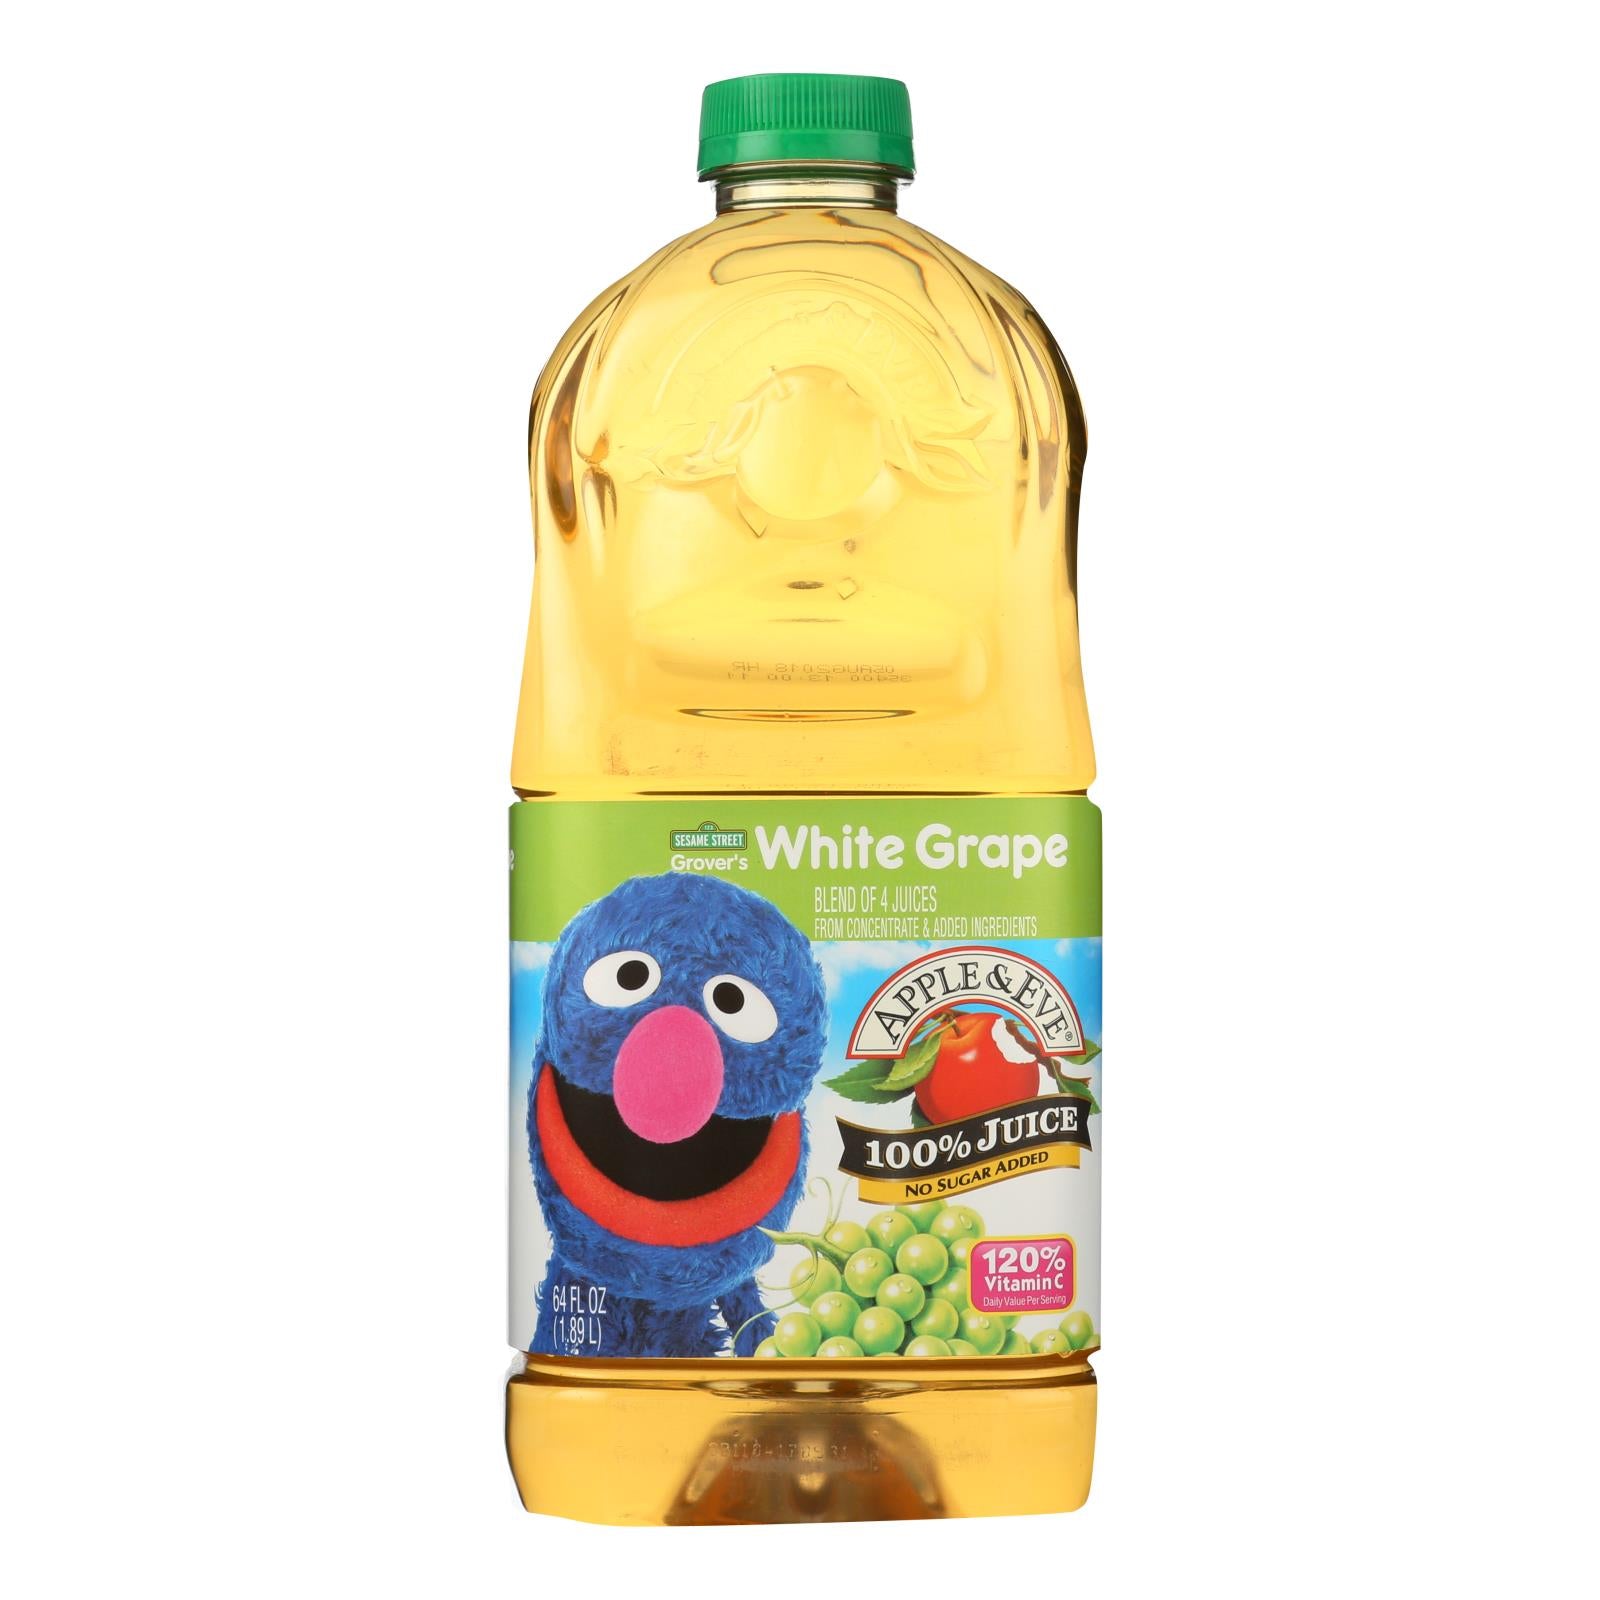 Apple & Eve, Apple and Eve Sesame Street 100 Percent Juice - Grover's White Grape - Case of 8 - 64 Fl oz. (Pack of 8)